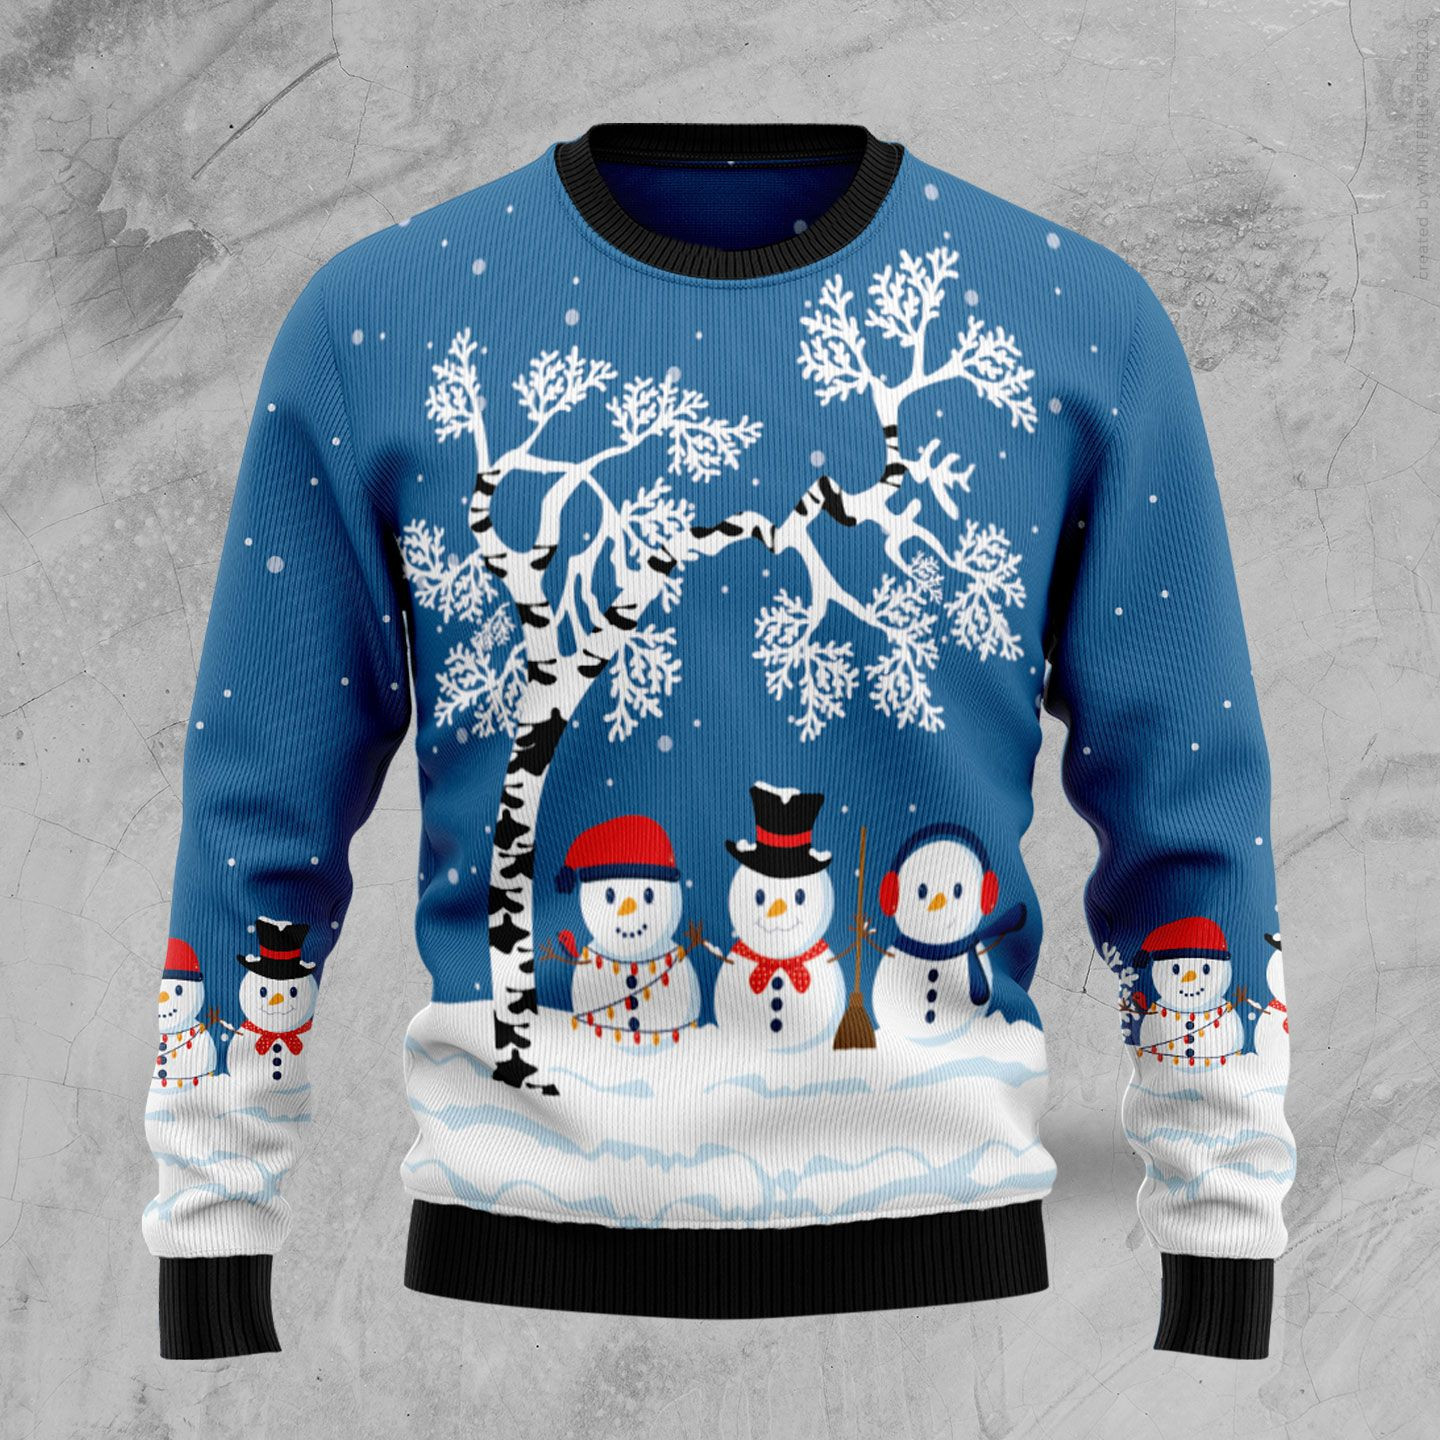 Snowman Beauty Ugly Christmas Sweater Ugly Sweater For Men Women, Holiday Sweater